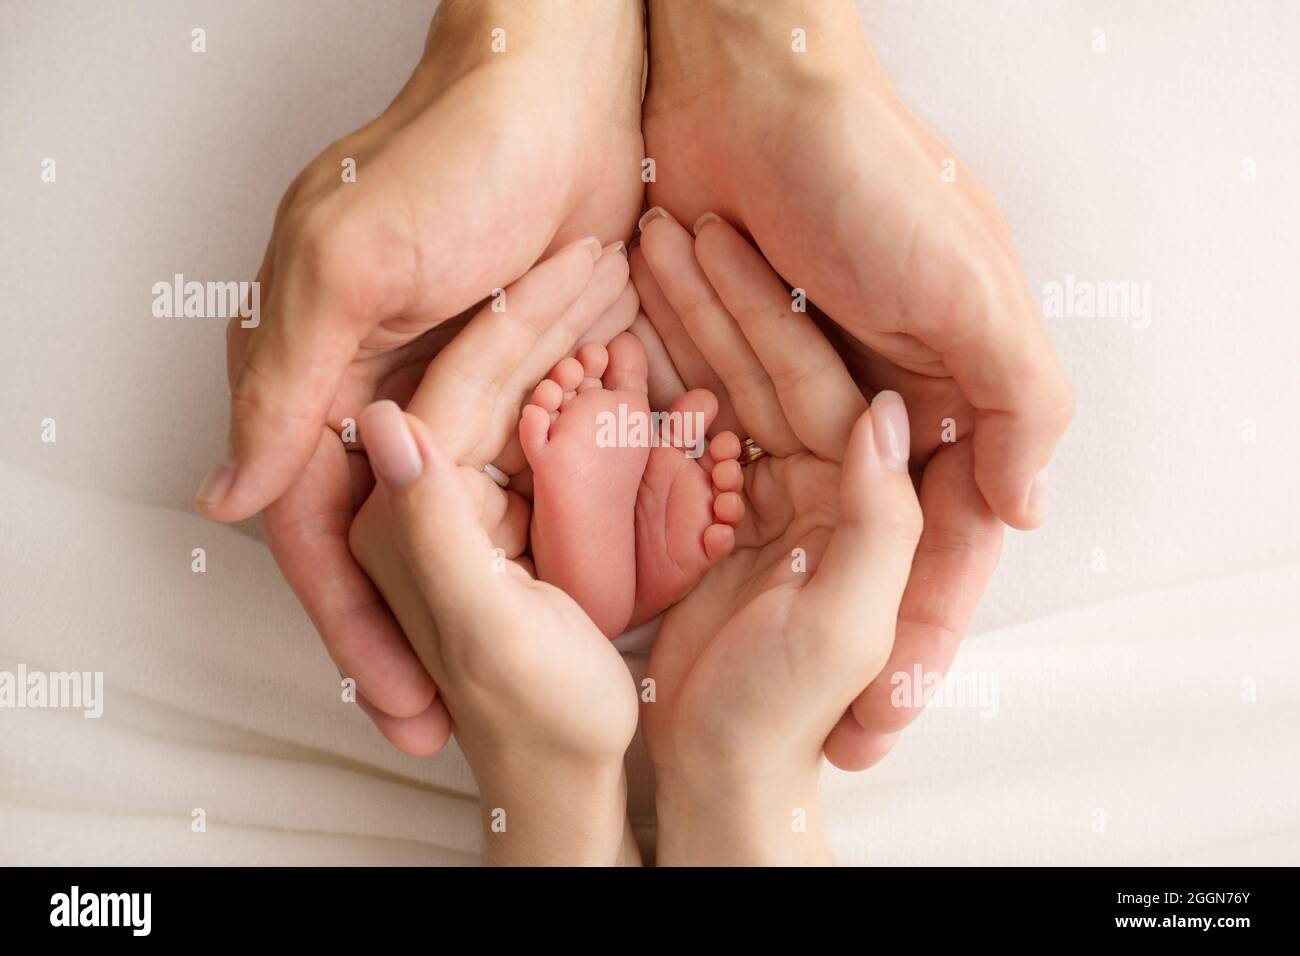 https://c8.alamy.com/comp/2GGN76Y/the-legs-of-the-child-in-the-arms-of-our-mother-and-father-feet-of-a-newborn-baby-little-baby-legs-2GGN76Y.jpg